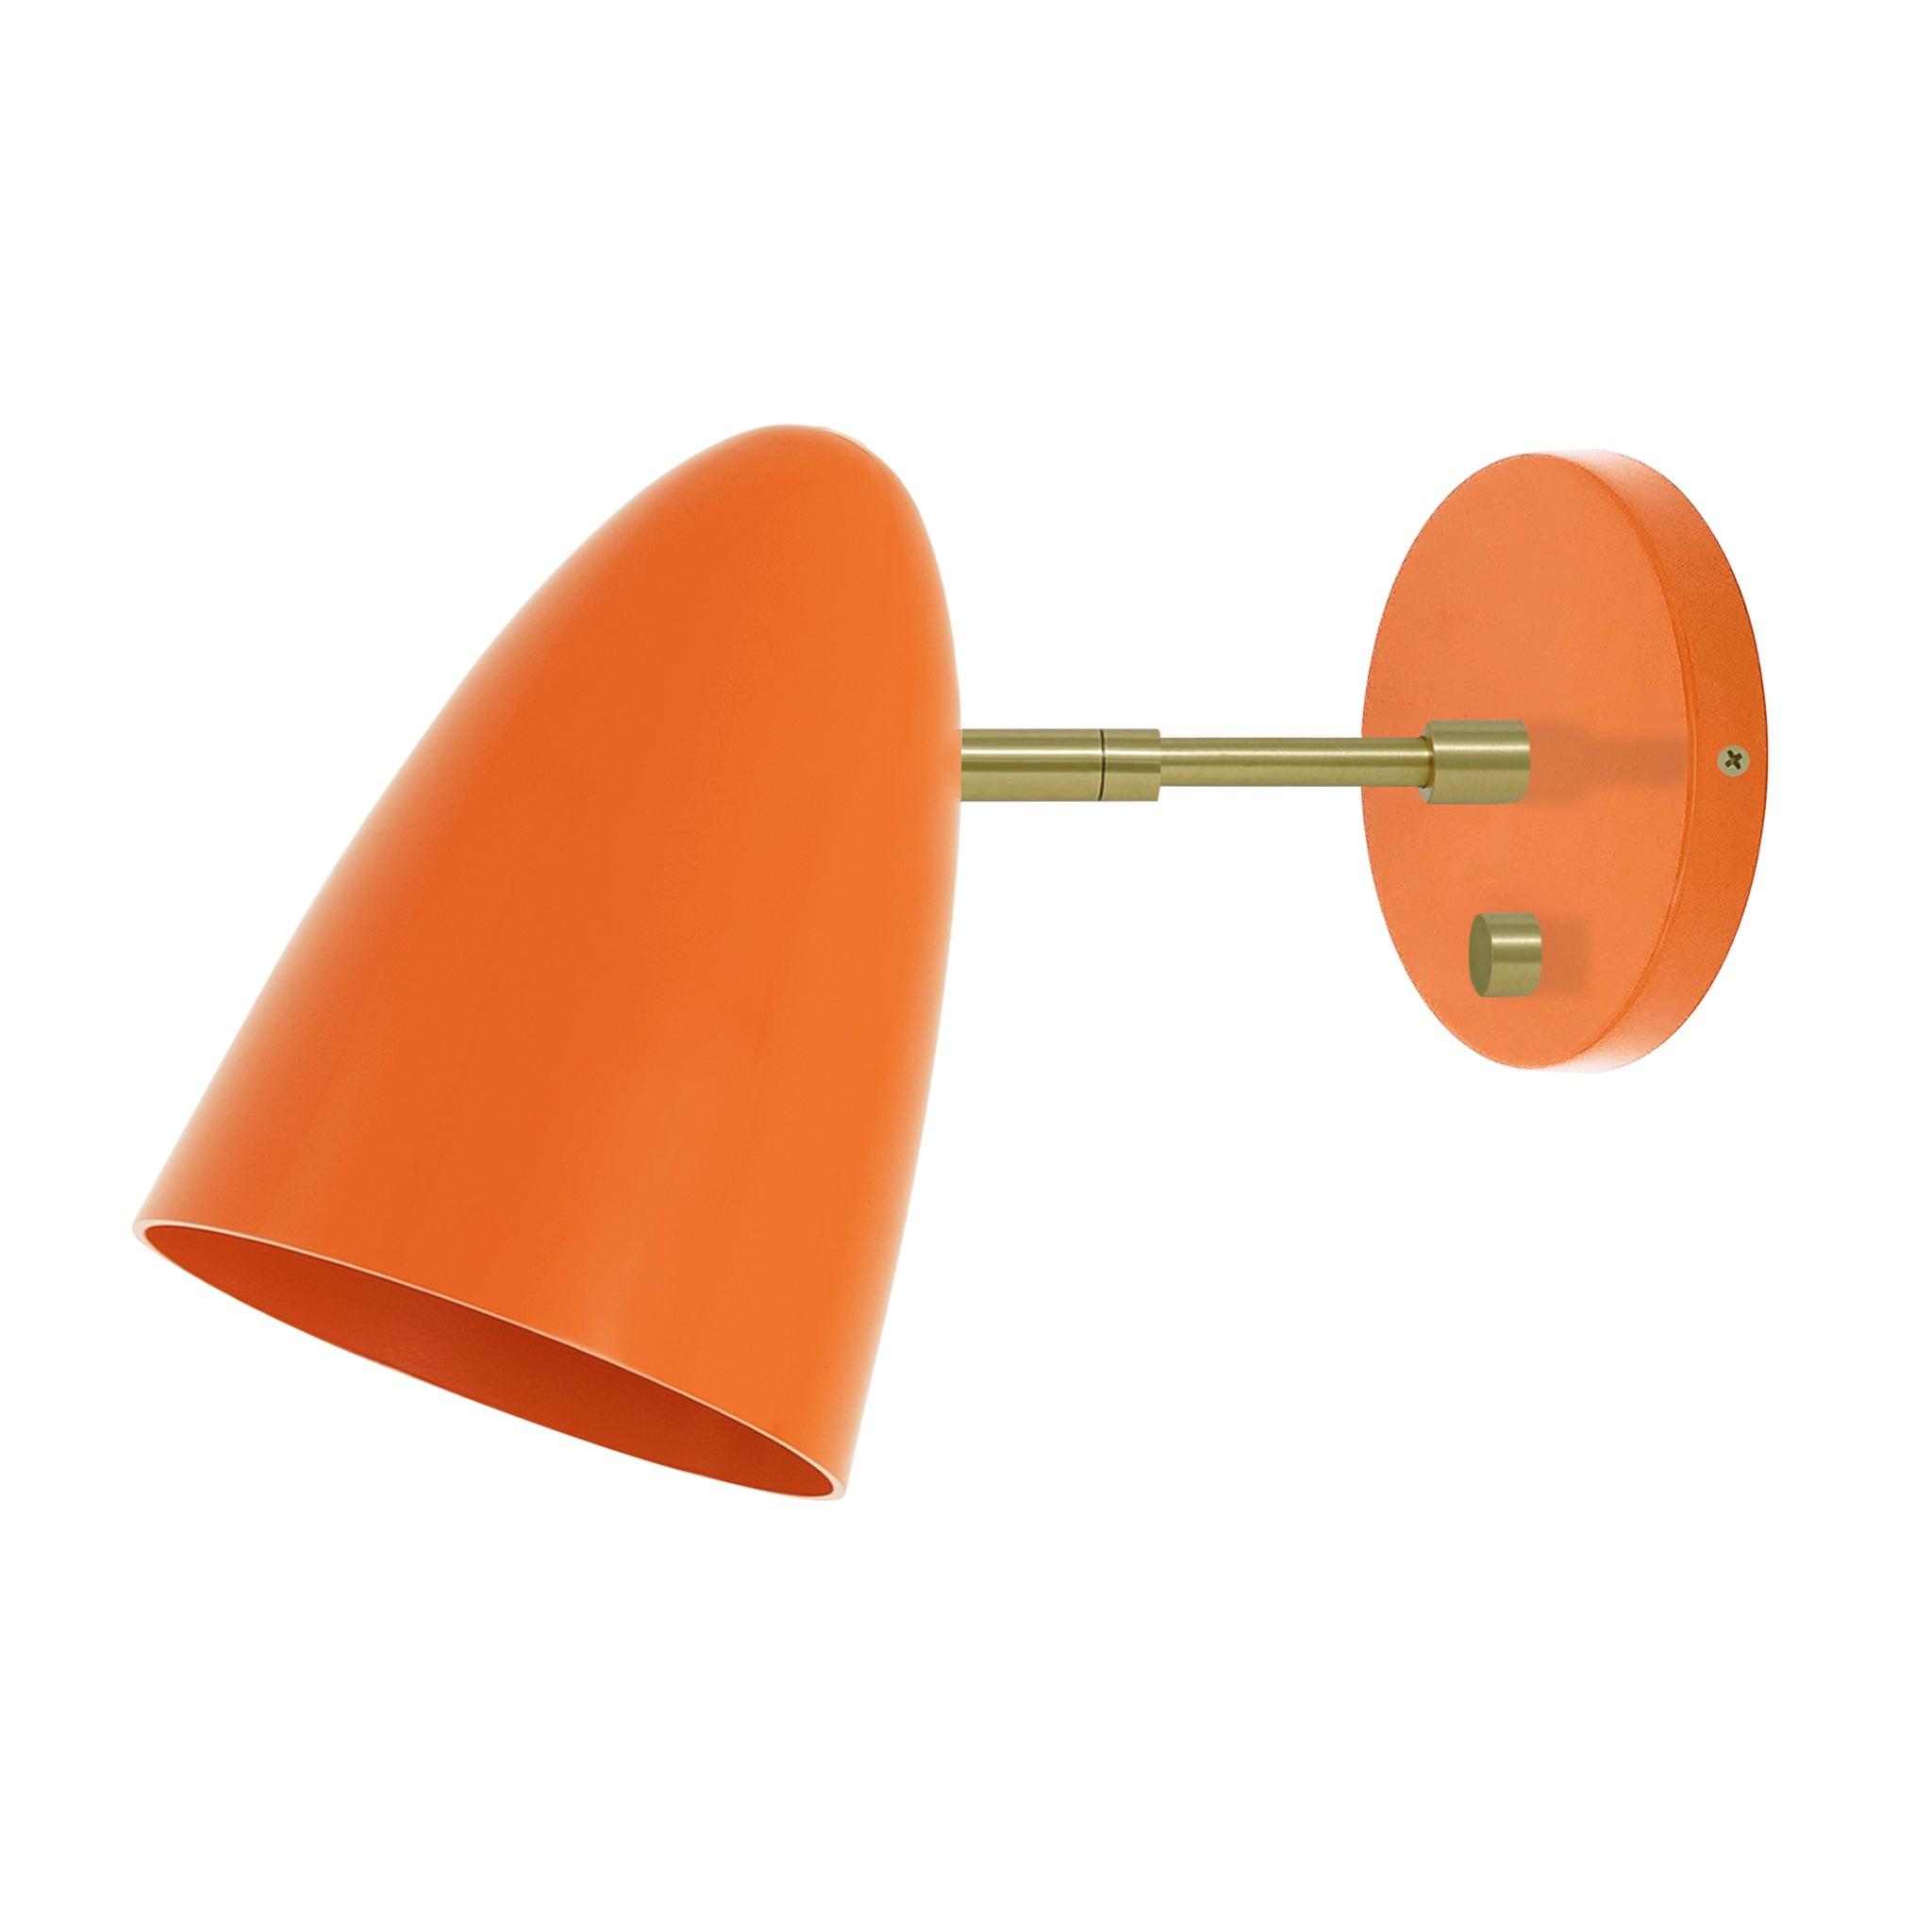 Brass and orange color Boom sconce 3" arm Dutton Brown lighting